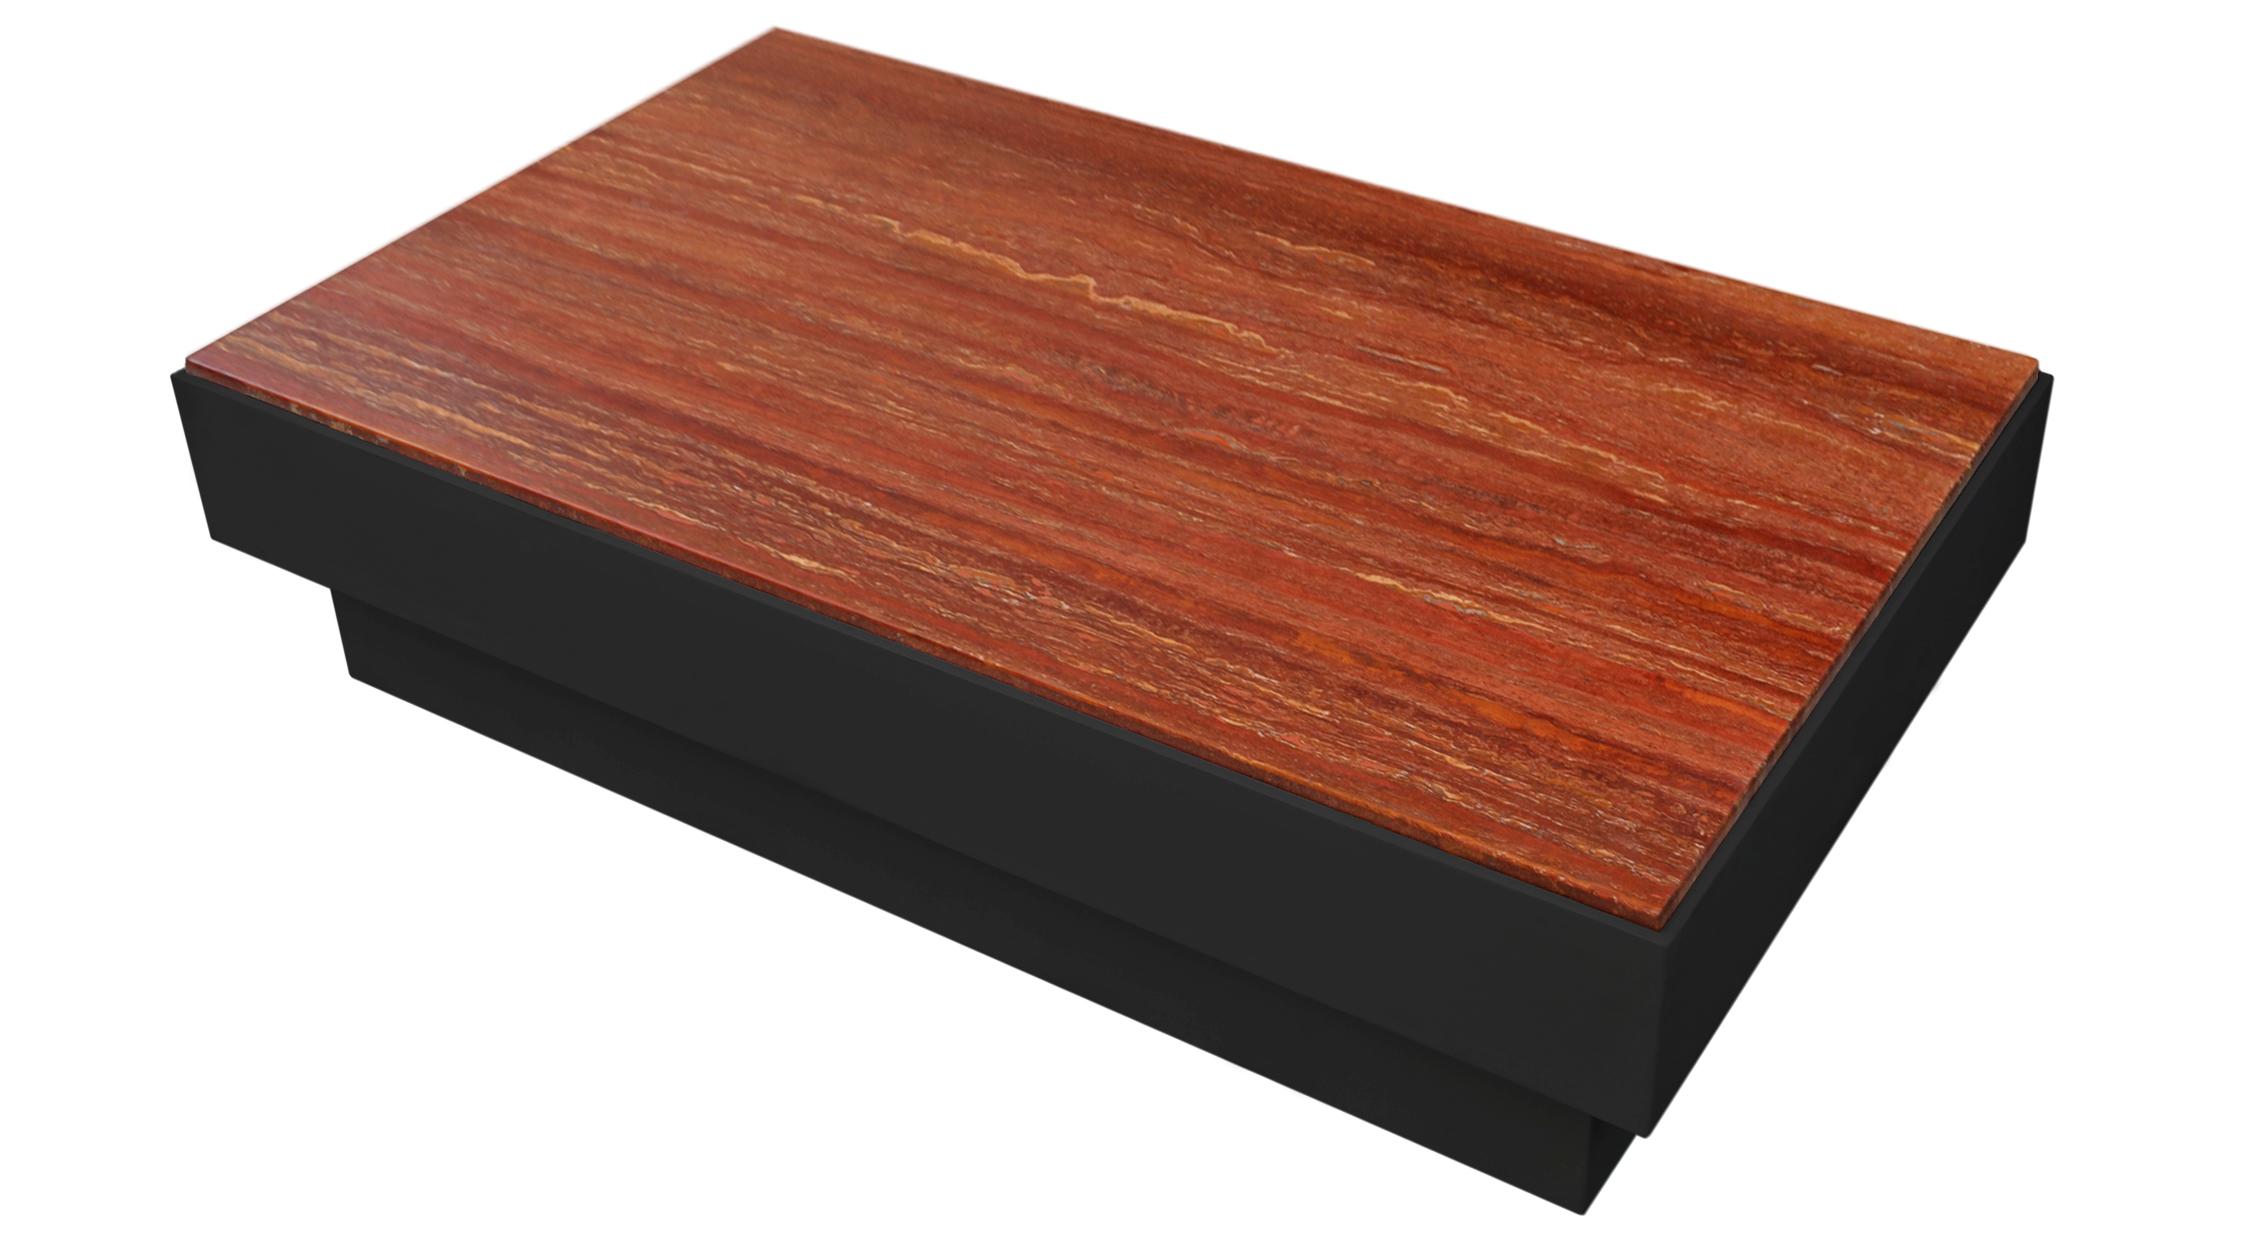 Italian Coffee table red travertine and black wooden base handmade in Italy by Cupioli For Sale